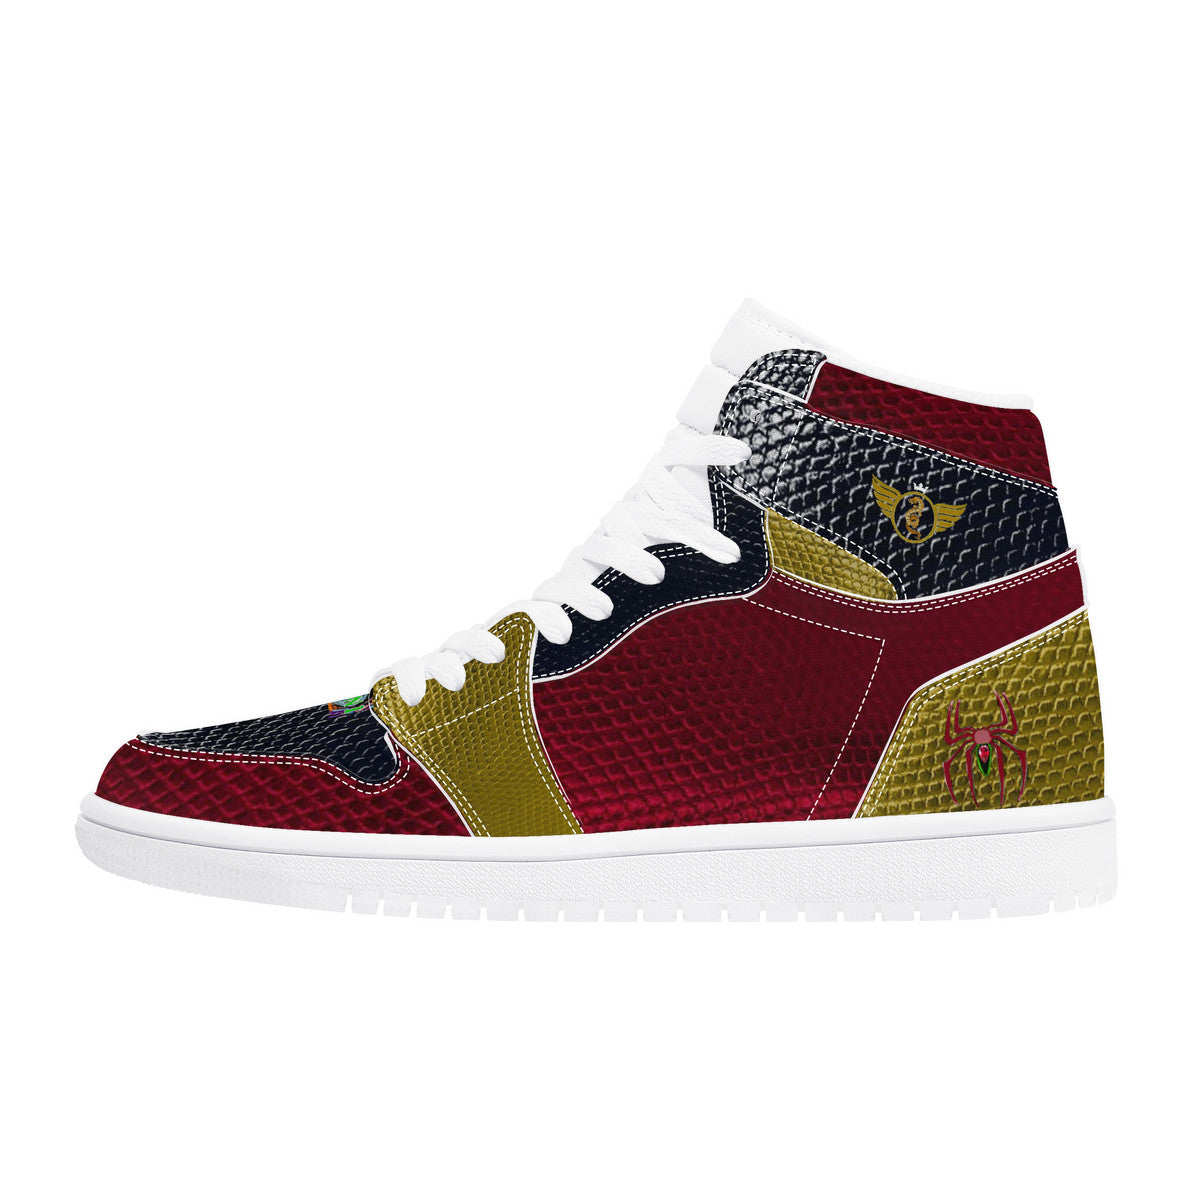 Majestic Series - Gold, Red and Black Print | Vision 1 Collection | Low Top Sneaker - Designed Shoe Drop - Shoe Zero